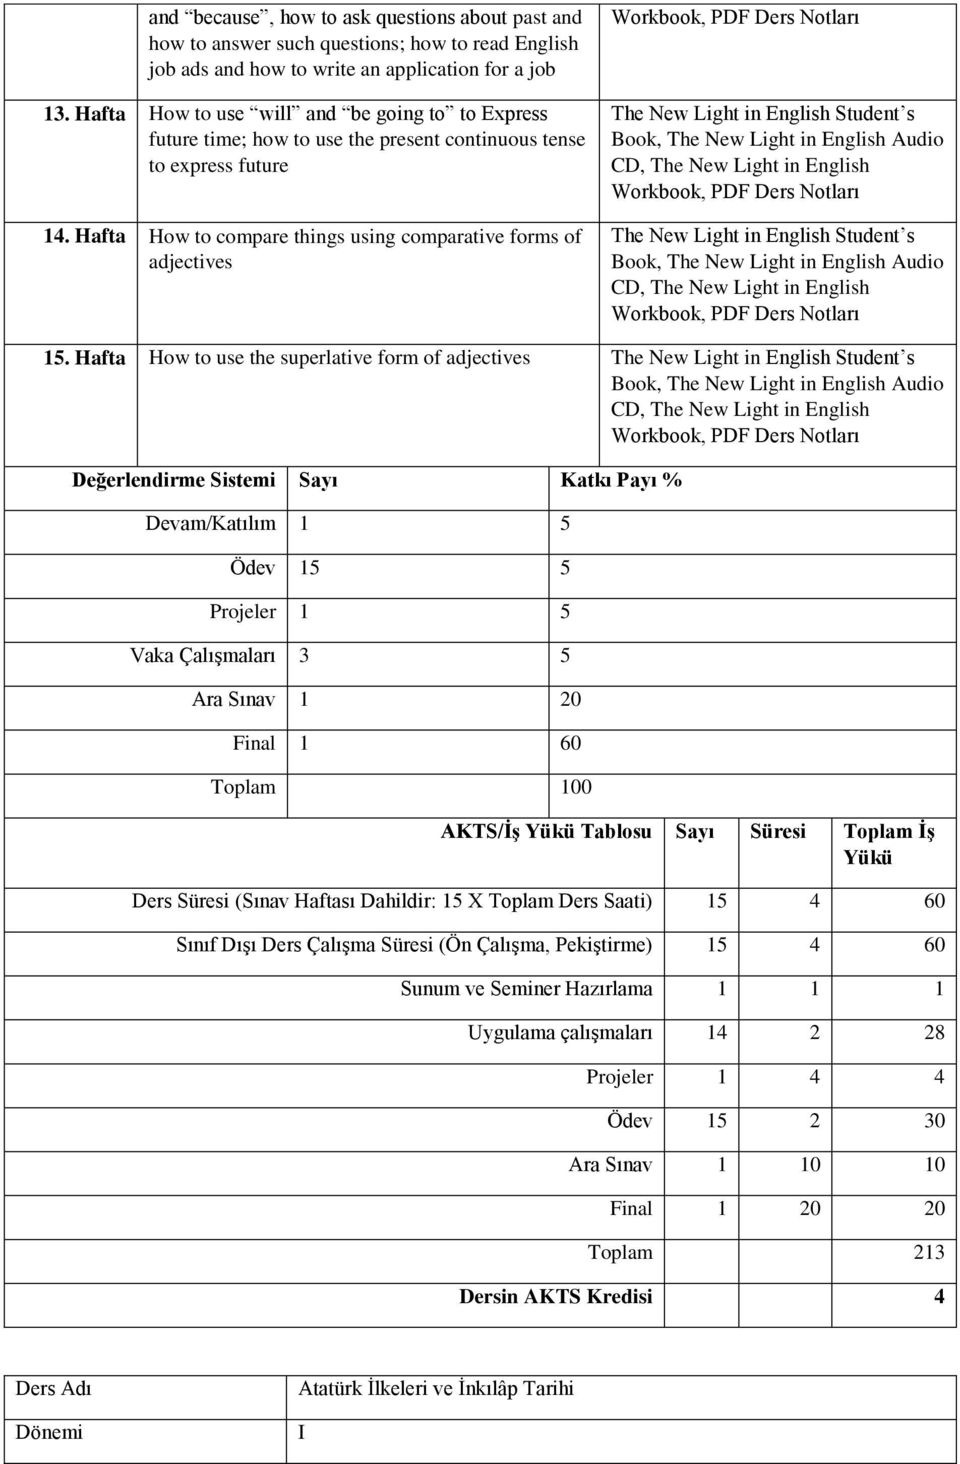 Hafta How to compare things using comparative forms of adjectives Workbook, PDF Ders Notları The New Light in English Student s Book, The New Light in English Audio CD, The New Light in English